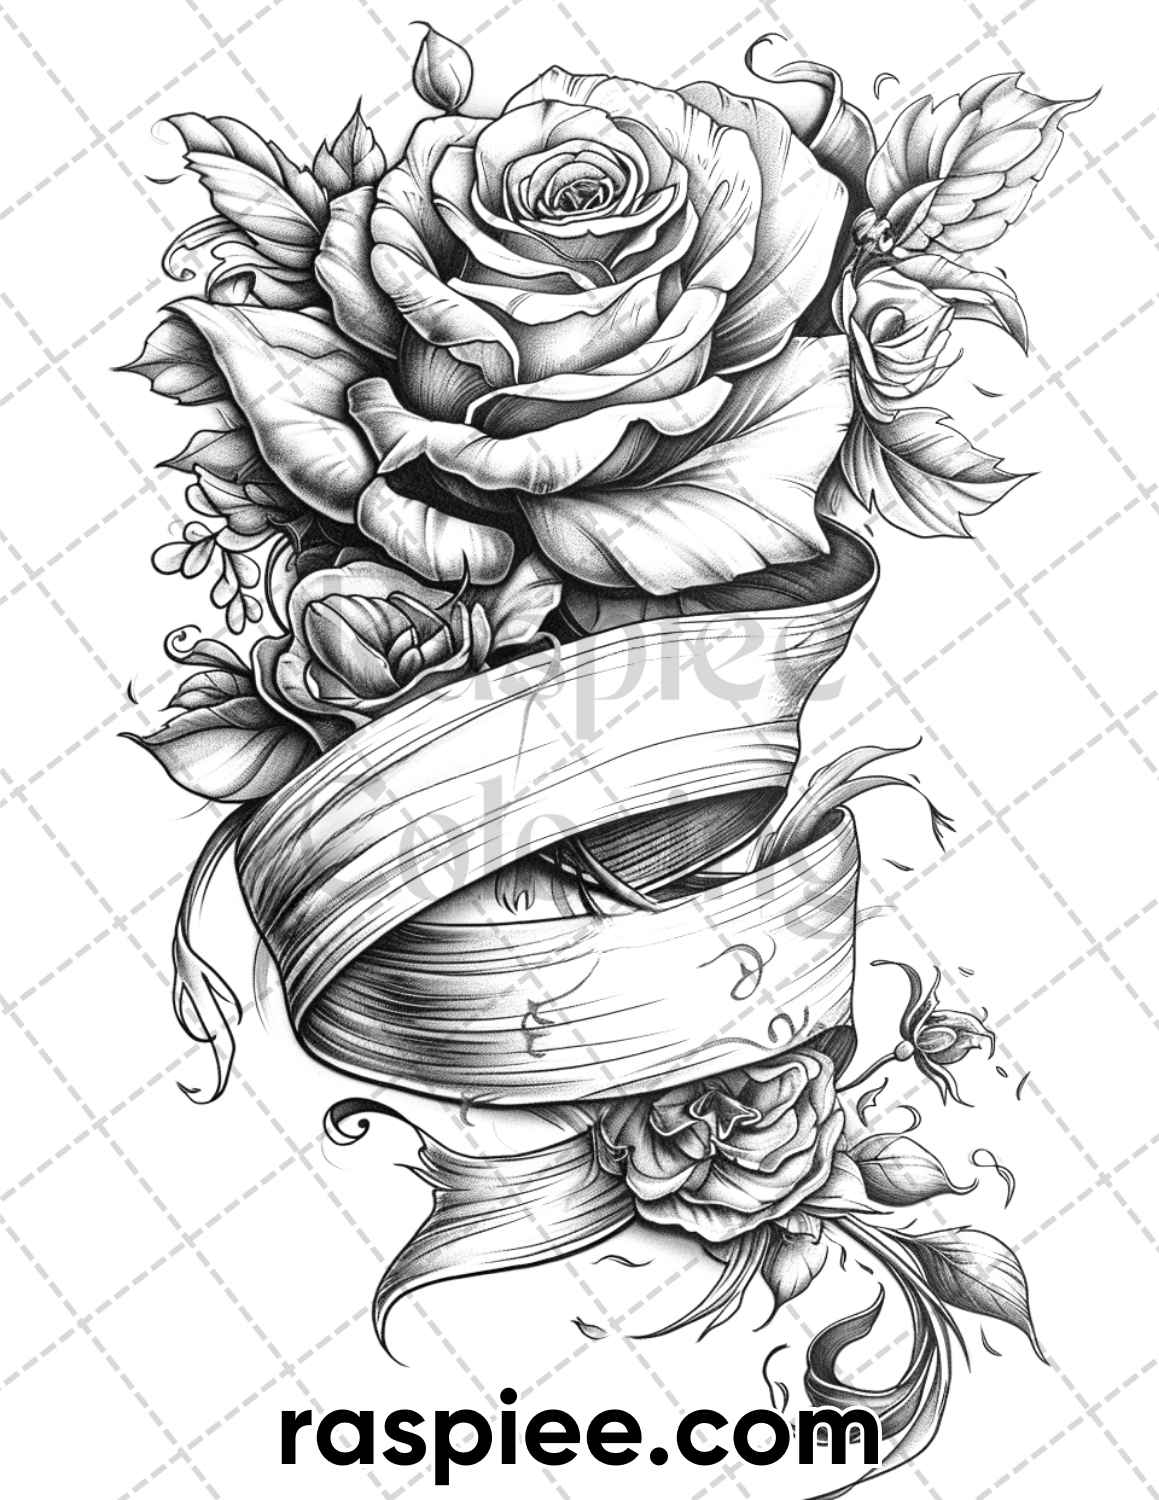 adult coloring pages, adult coloring sheets, adult coloring book pdf, adult coloring book printable, grayscale coloring pages, grayscale coloring books, tattoo coloring pages for adults, tattoo coloring book, grayscale illustration, american traditional tattoo coloring pages